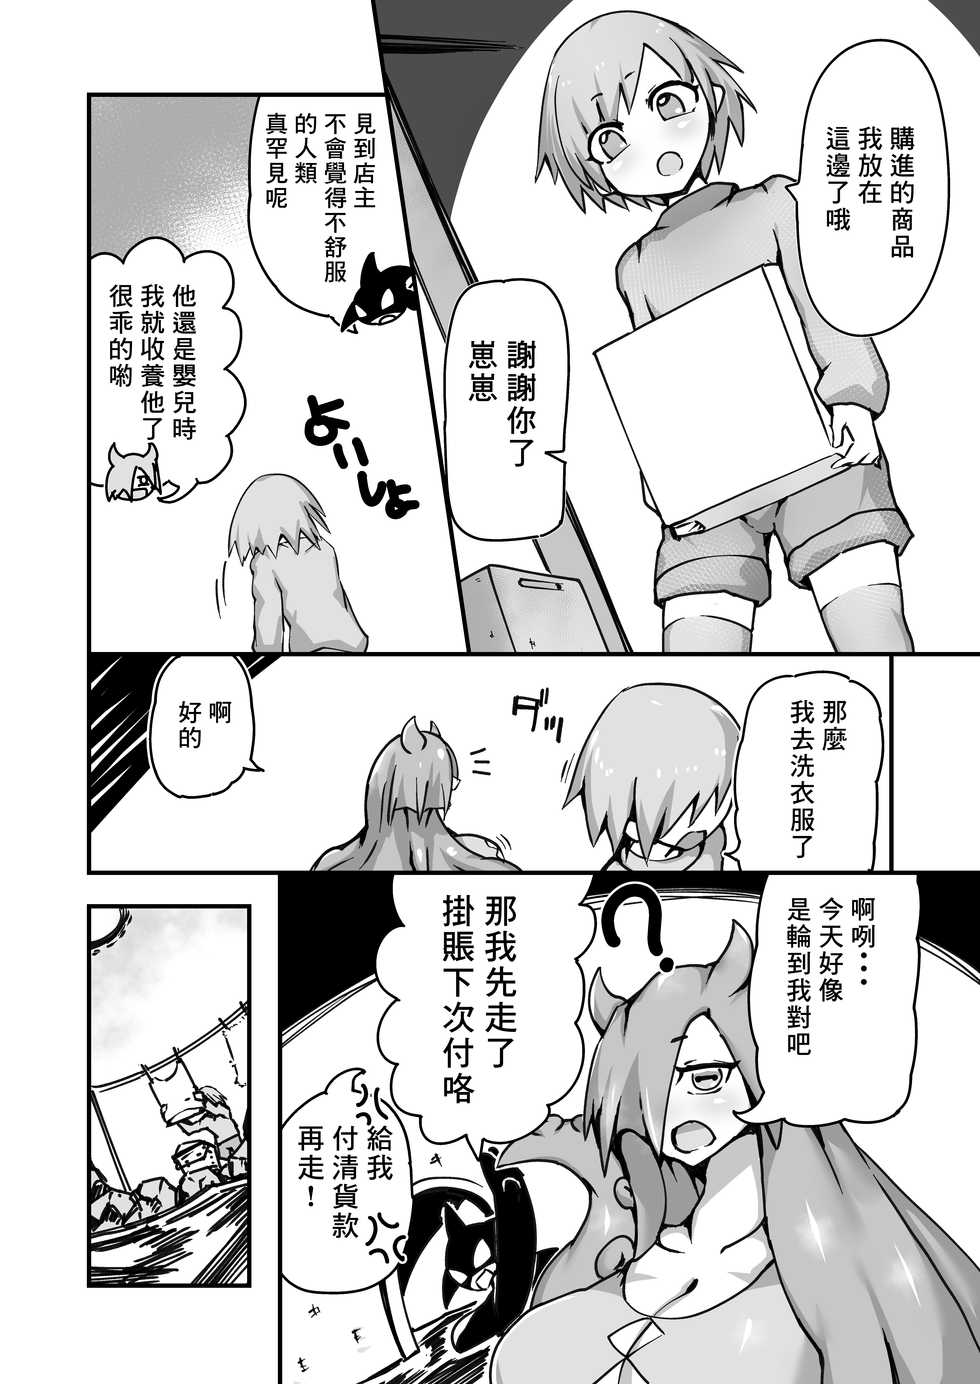 [Zettaizetumei] Himitsu no Omise no Octopus Hold [Chinese] [零食汉化组] - Page 5